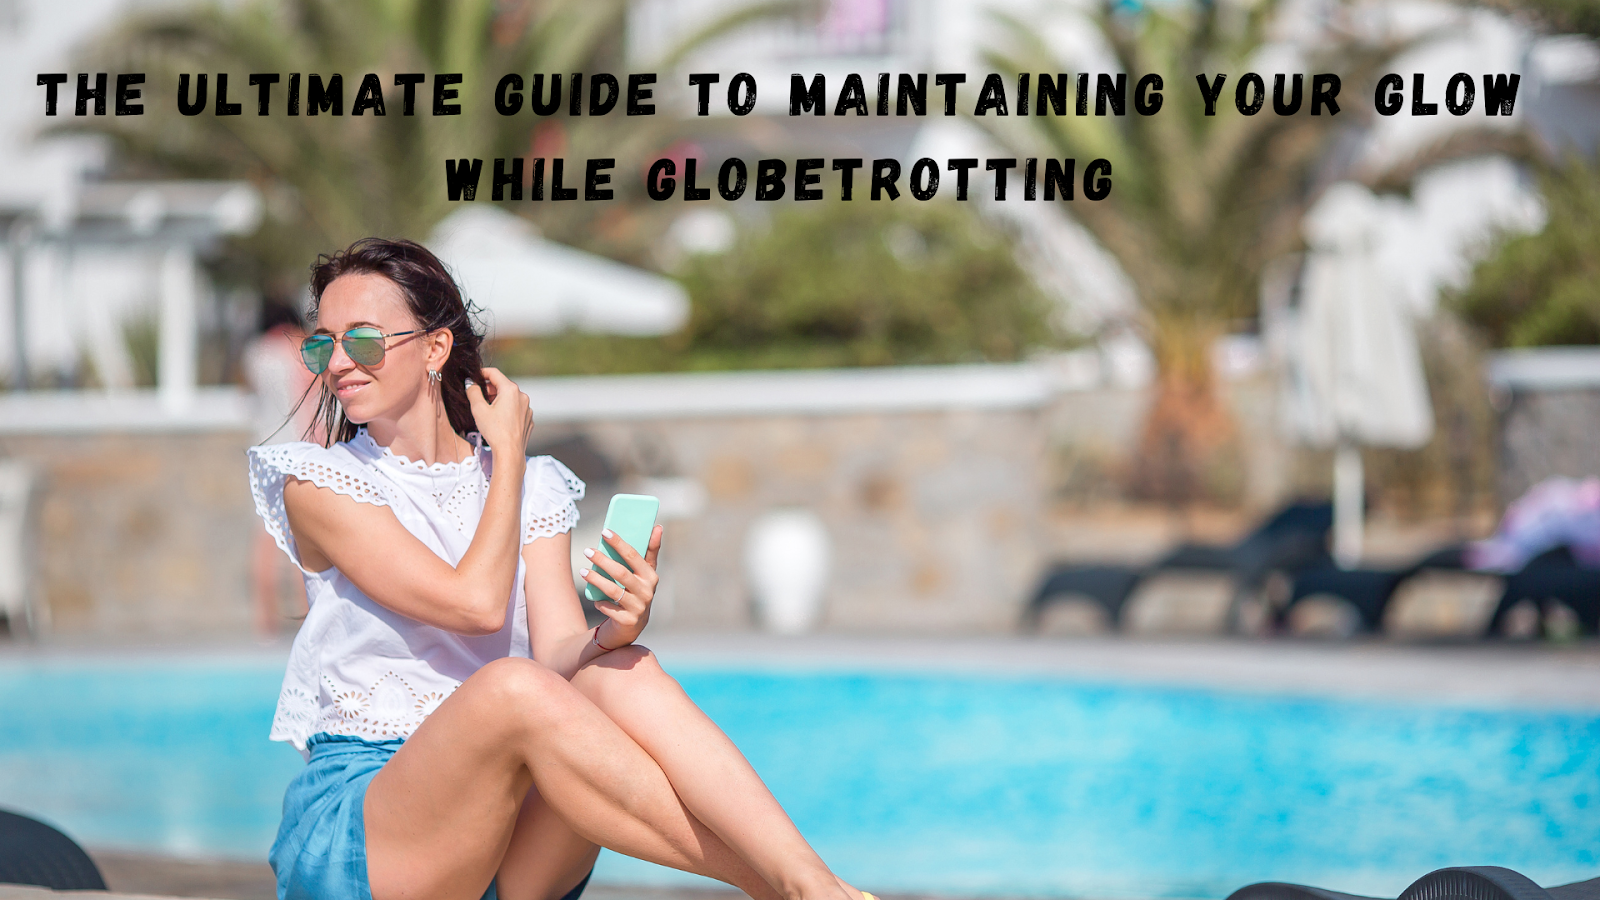 The Ultimate Guide to Maintaining Your Glow While Globetrotting